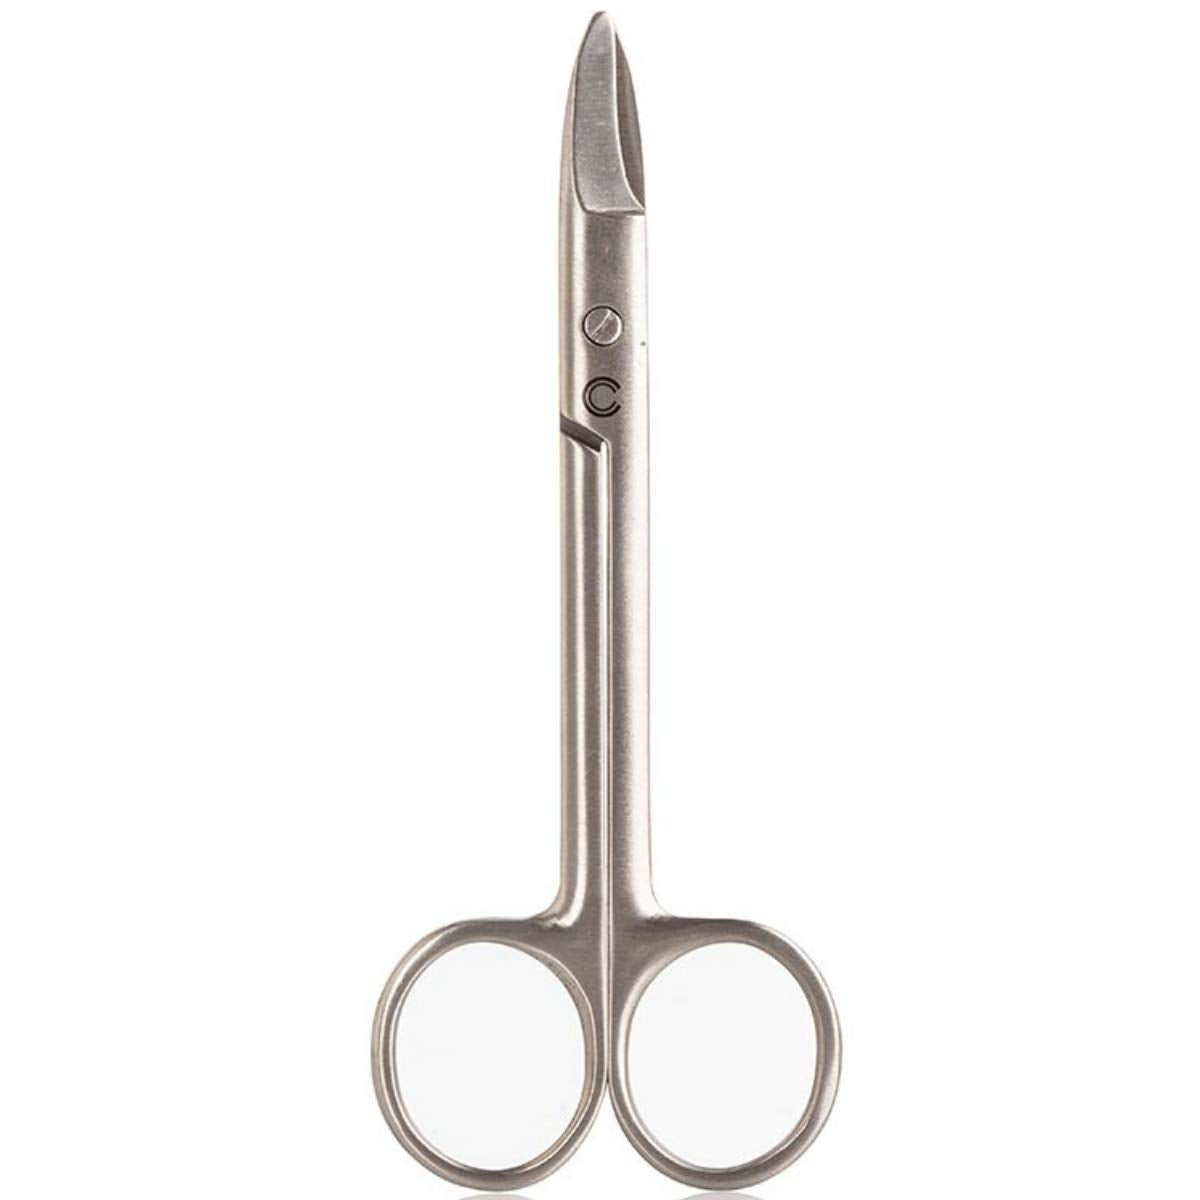 Toe Nail Scissor - Stainless Steel - Strong Sharp Curved Blades for Precision Trimming - Long Handles for better control - 4.5 inch - MazenOnline